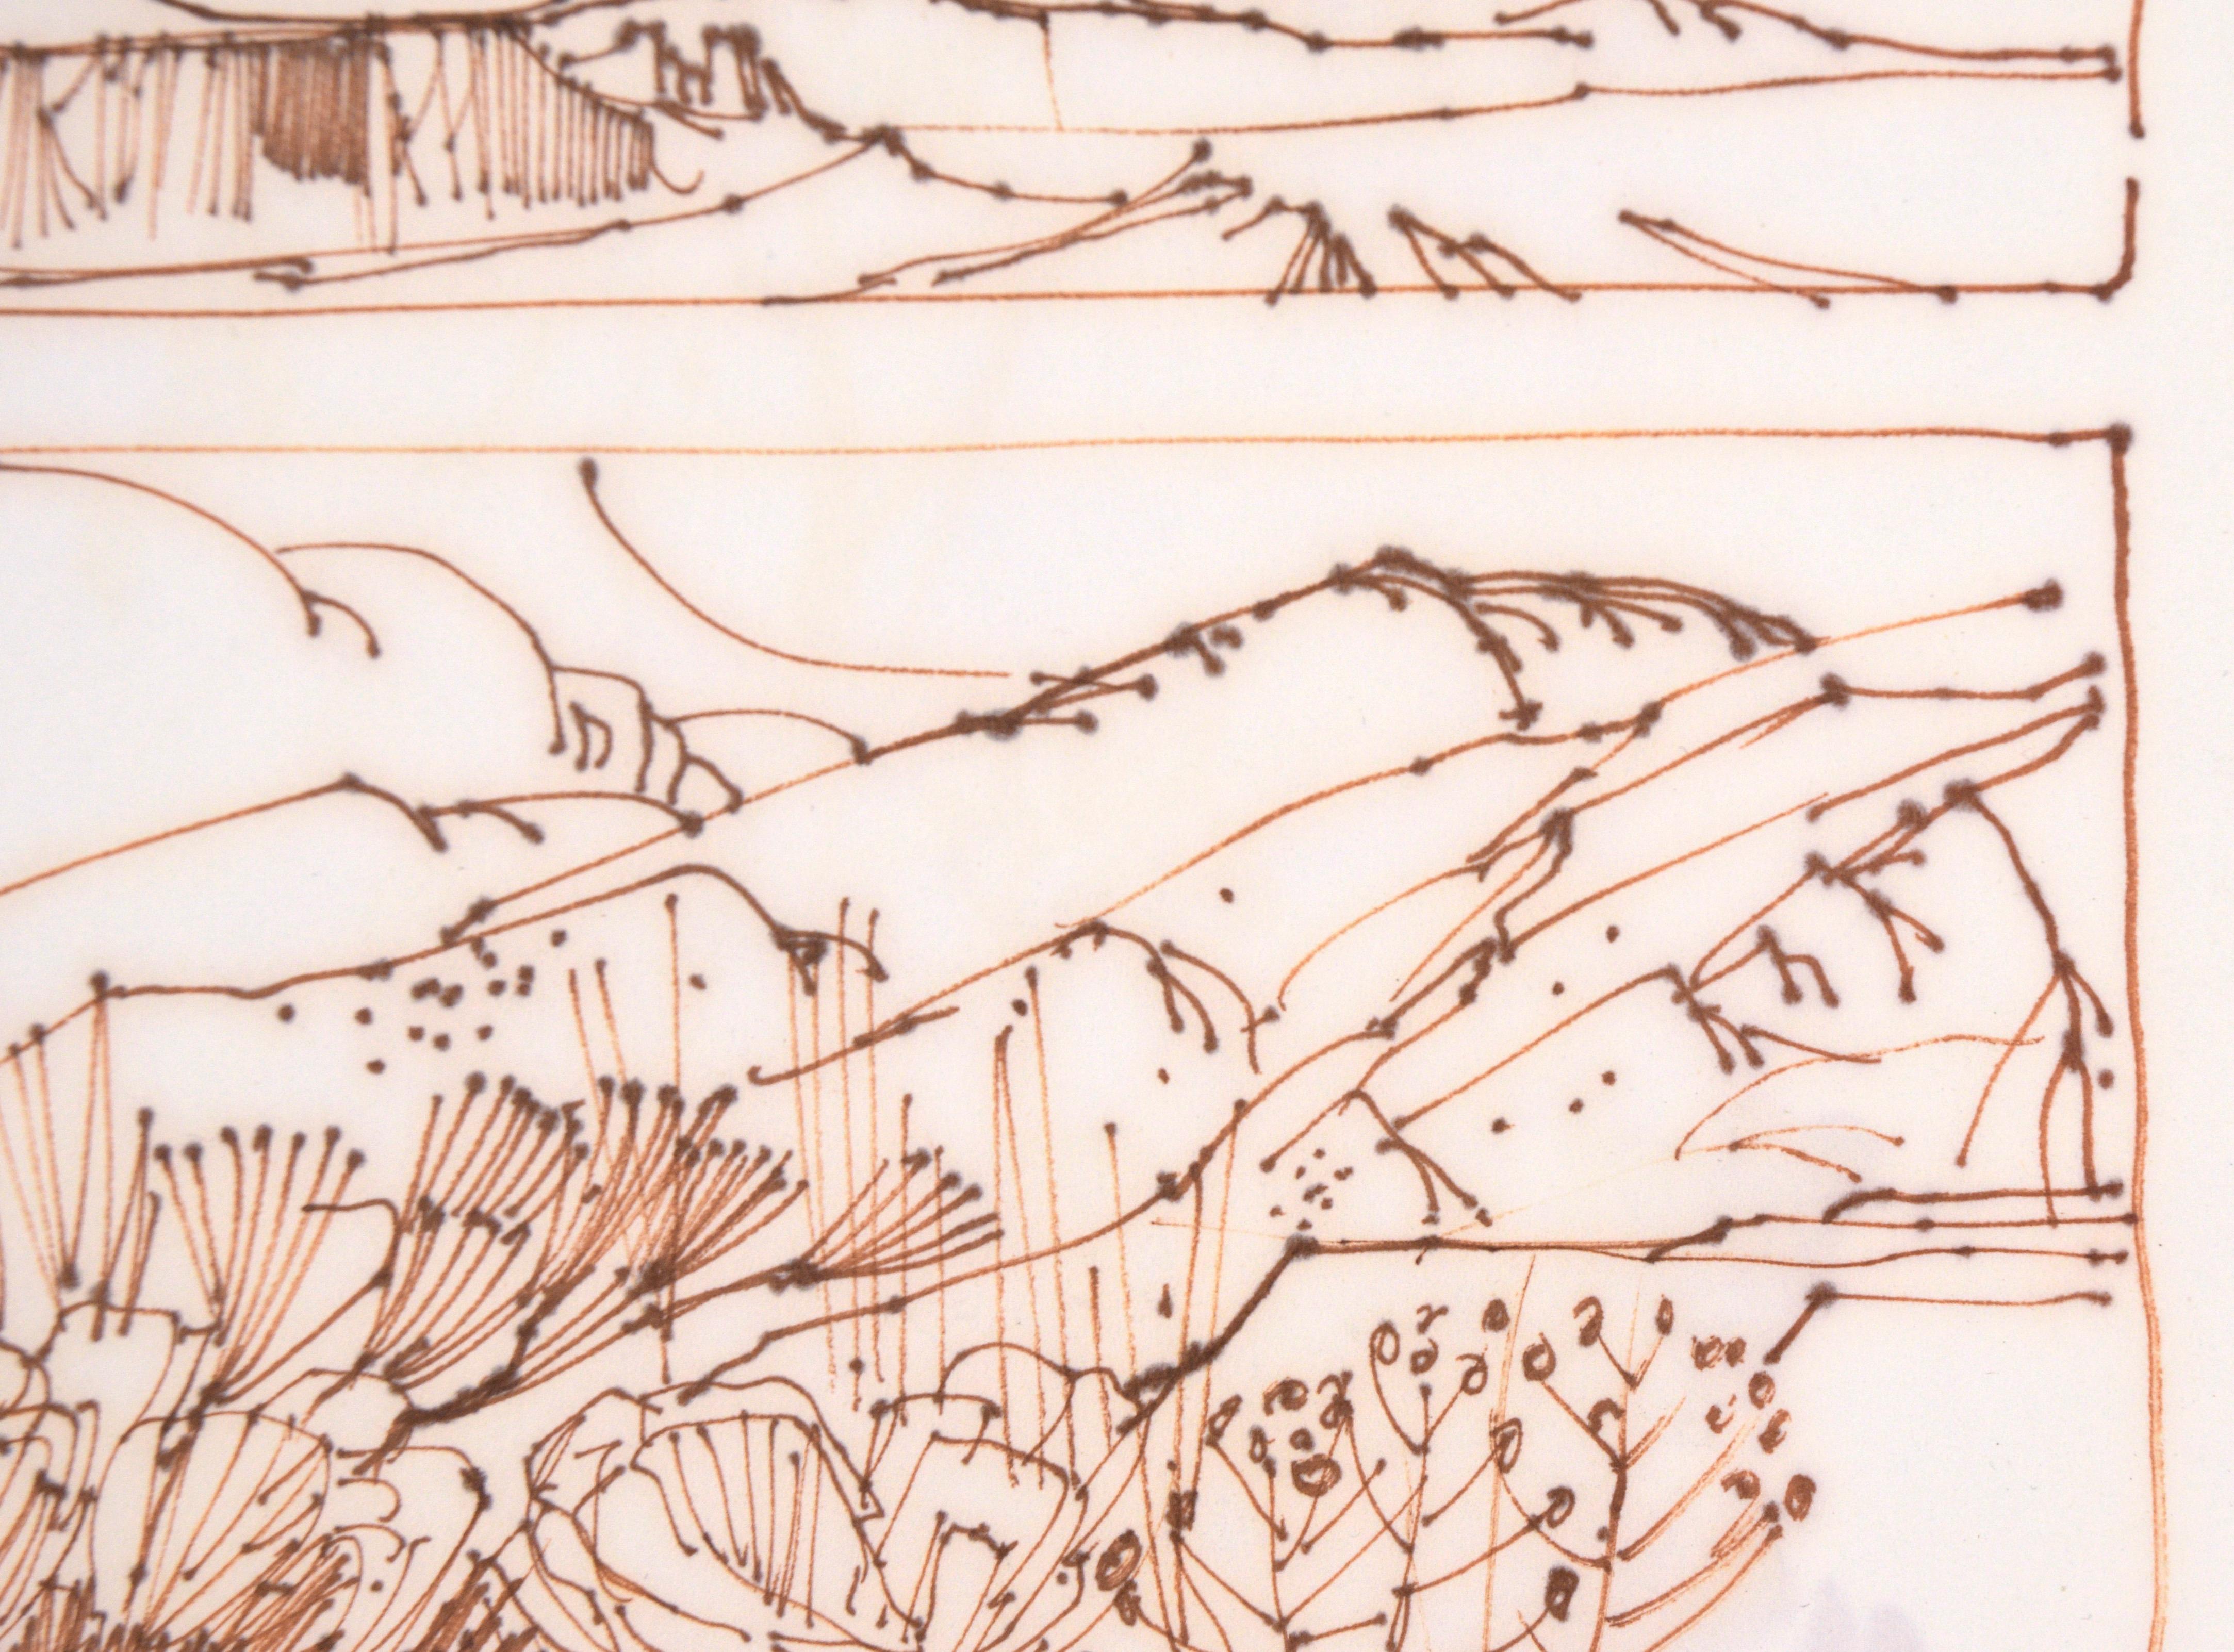 Two High Desert Landscapes - Line Drawing in Sepia-Toned Ink on Paper - American Impressionist Art by Laurence Sisson